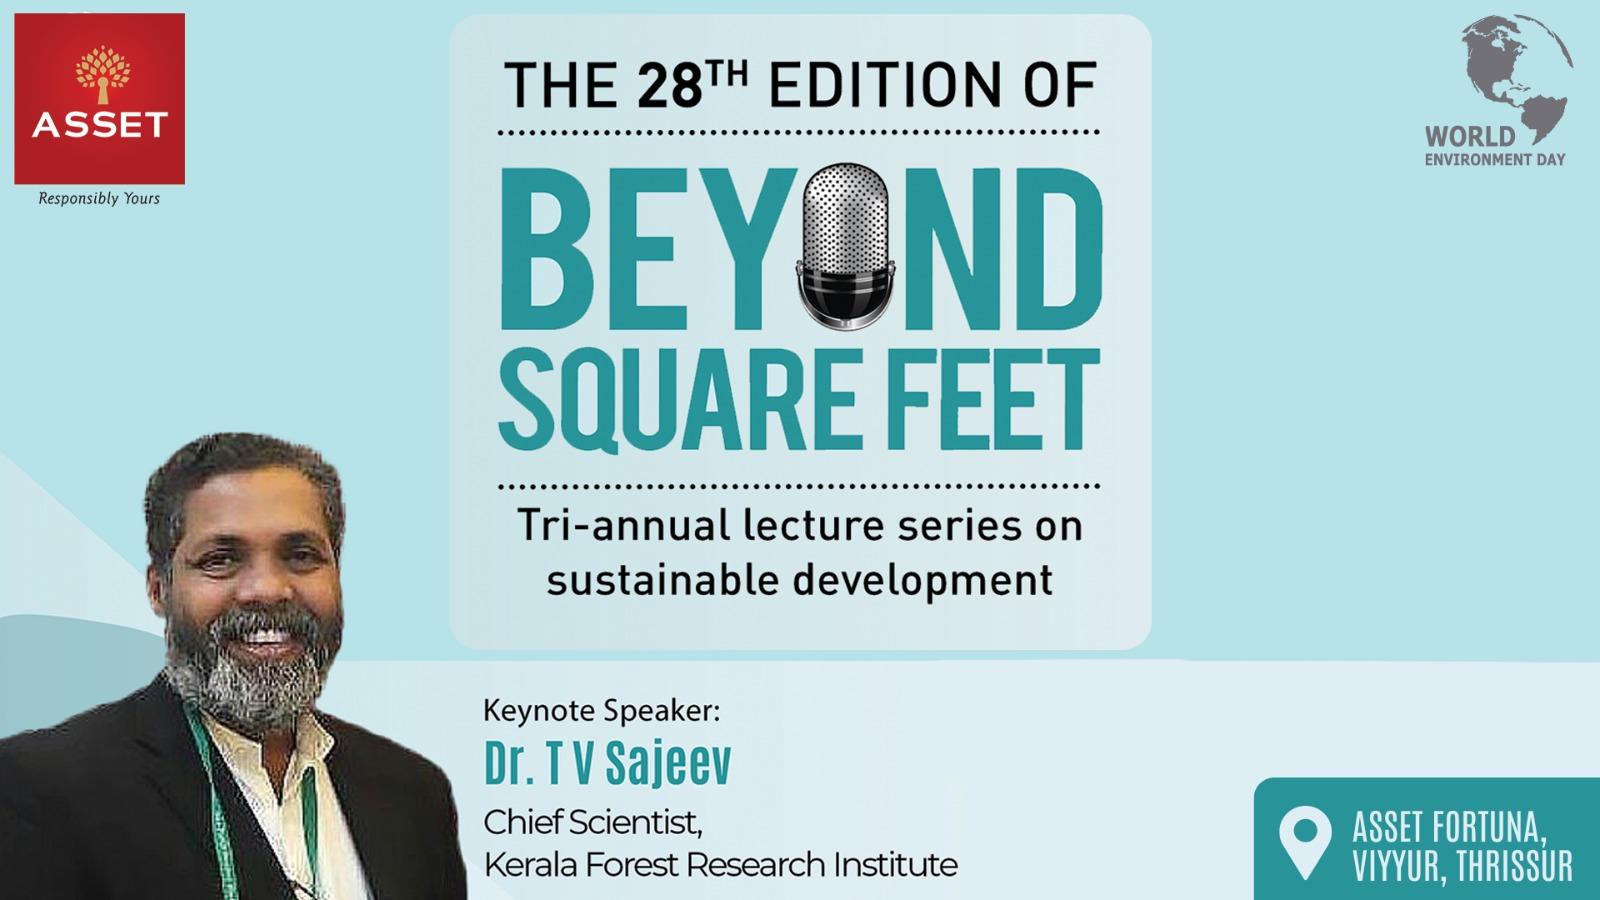 28th Edition of Beyond Square Feet